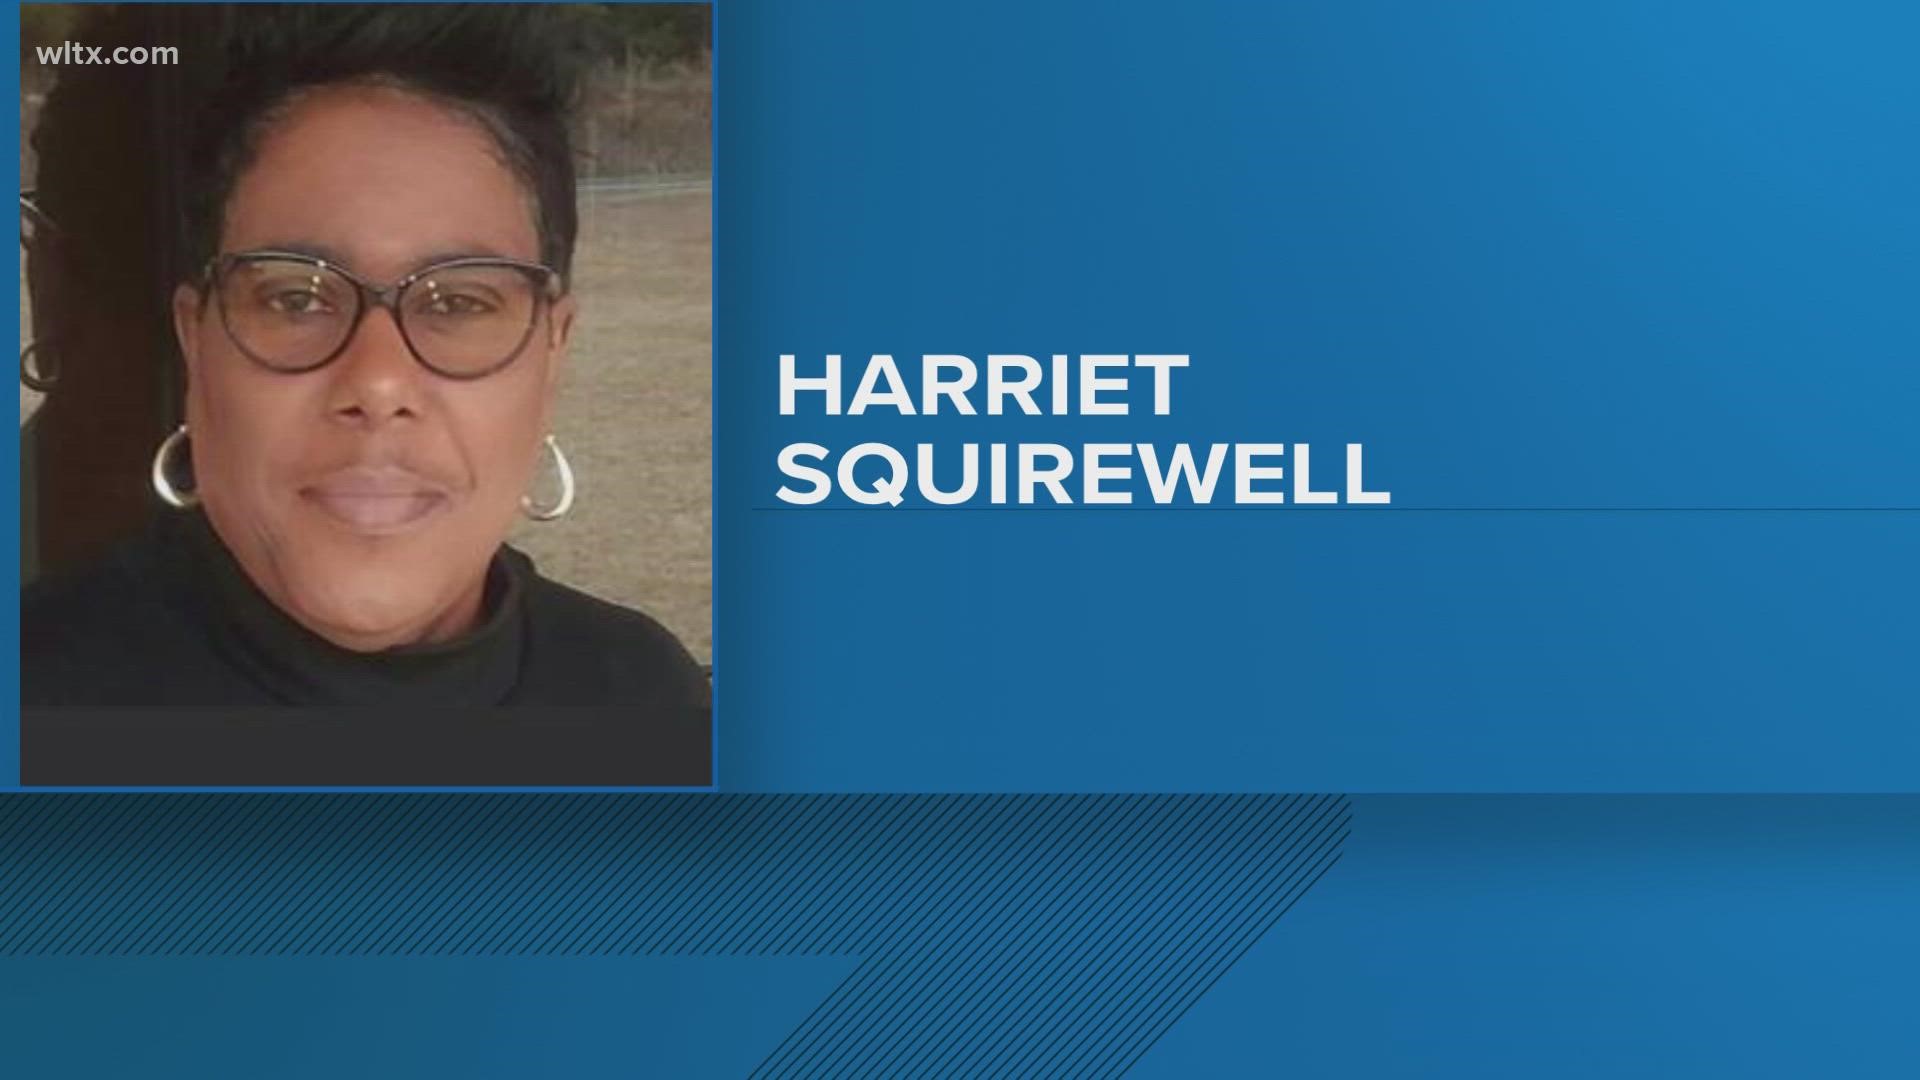 Captain Harriet Squirewell will be responsible for overall management of the detention center staff and services